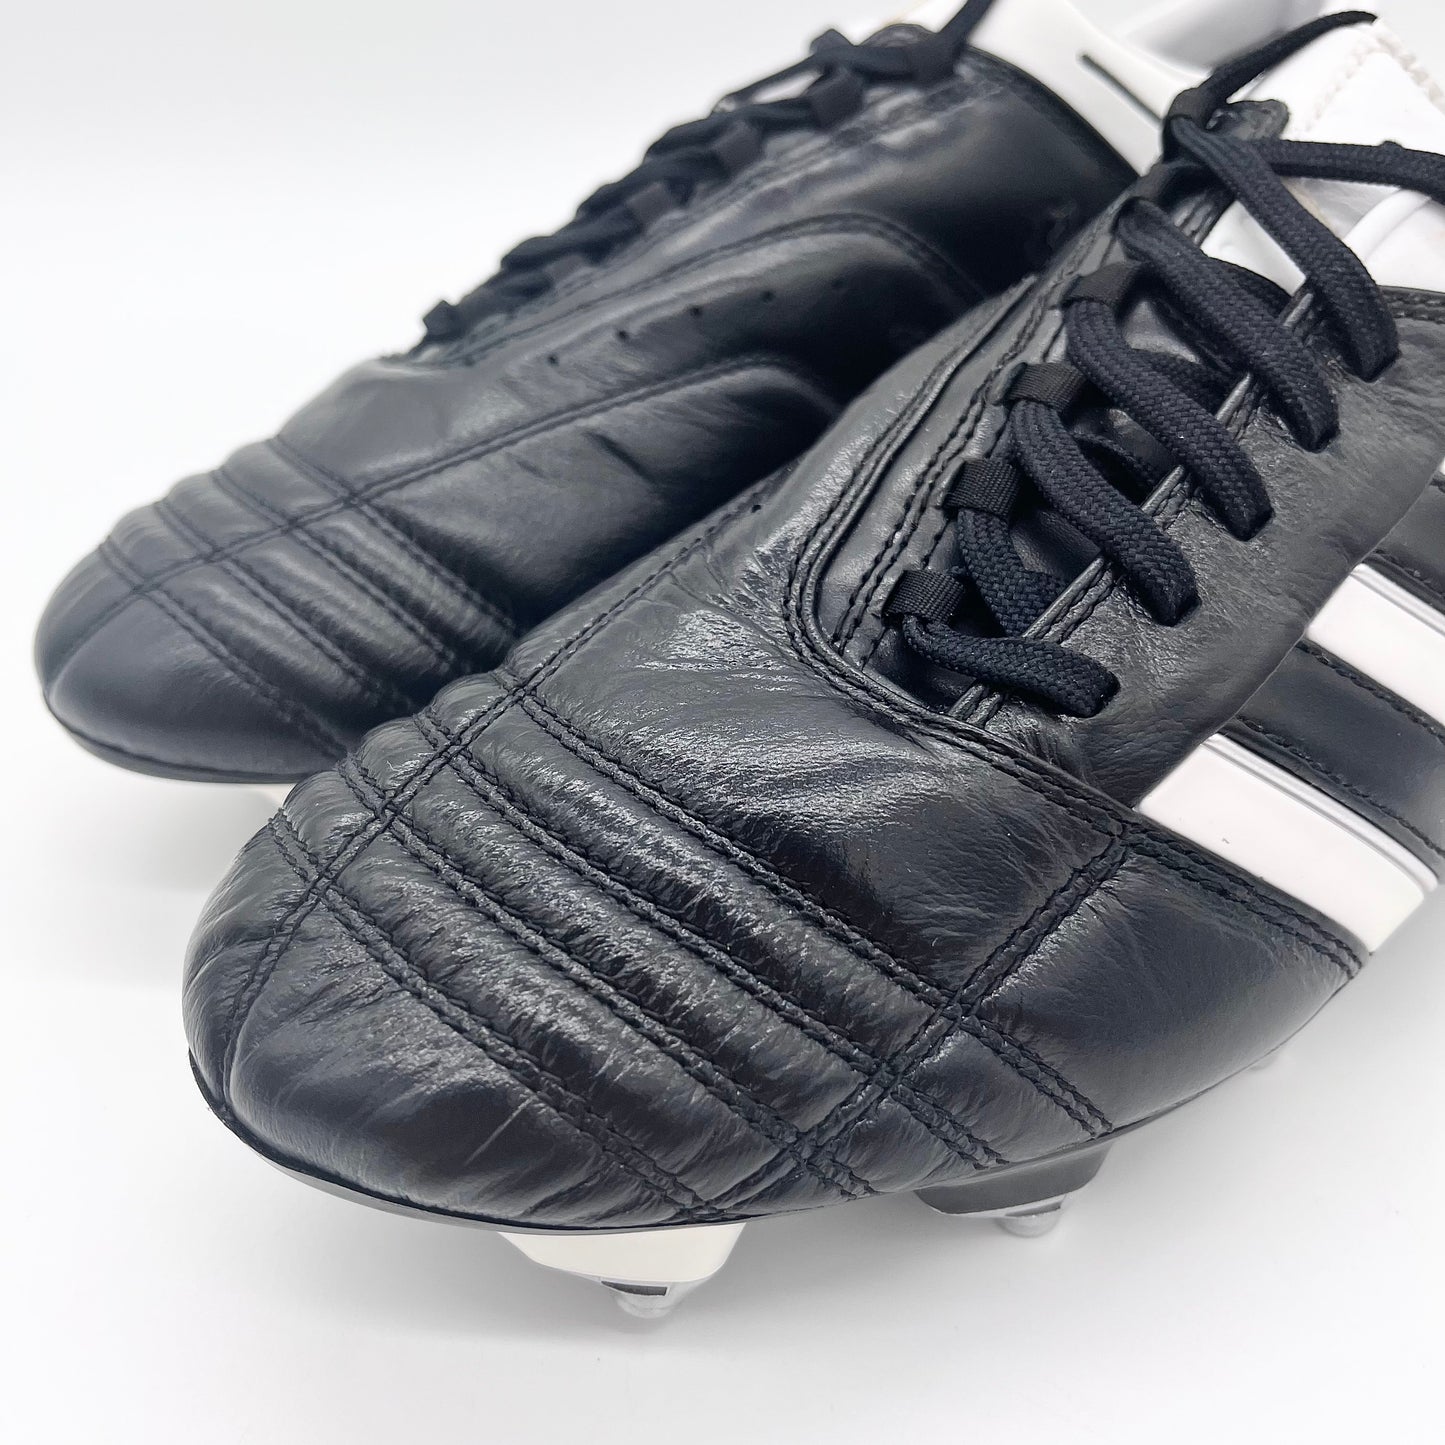 Brillante Escribe email Extra Gareth Barry Match Issued Adidas AdiPure II – BC Boots UK